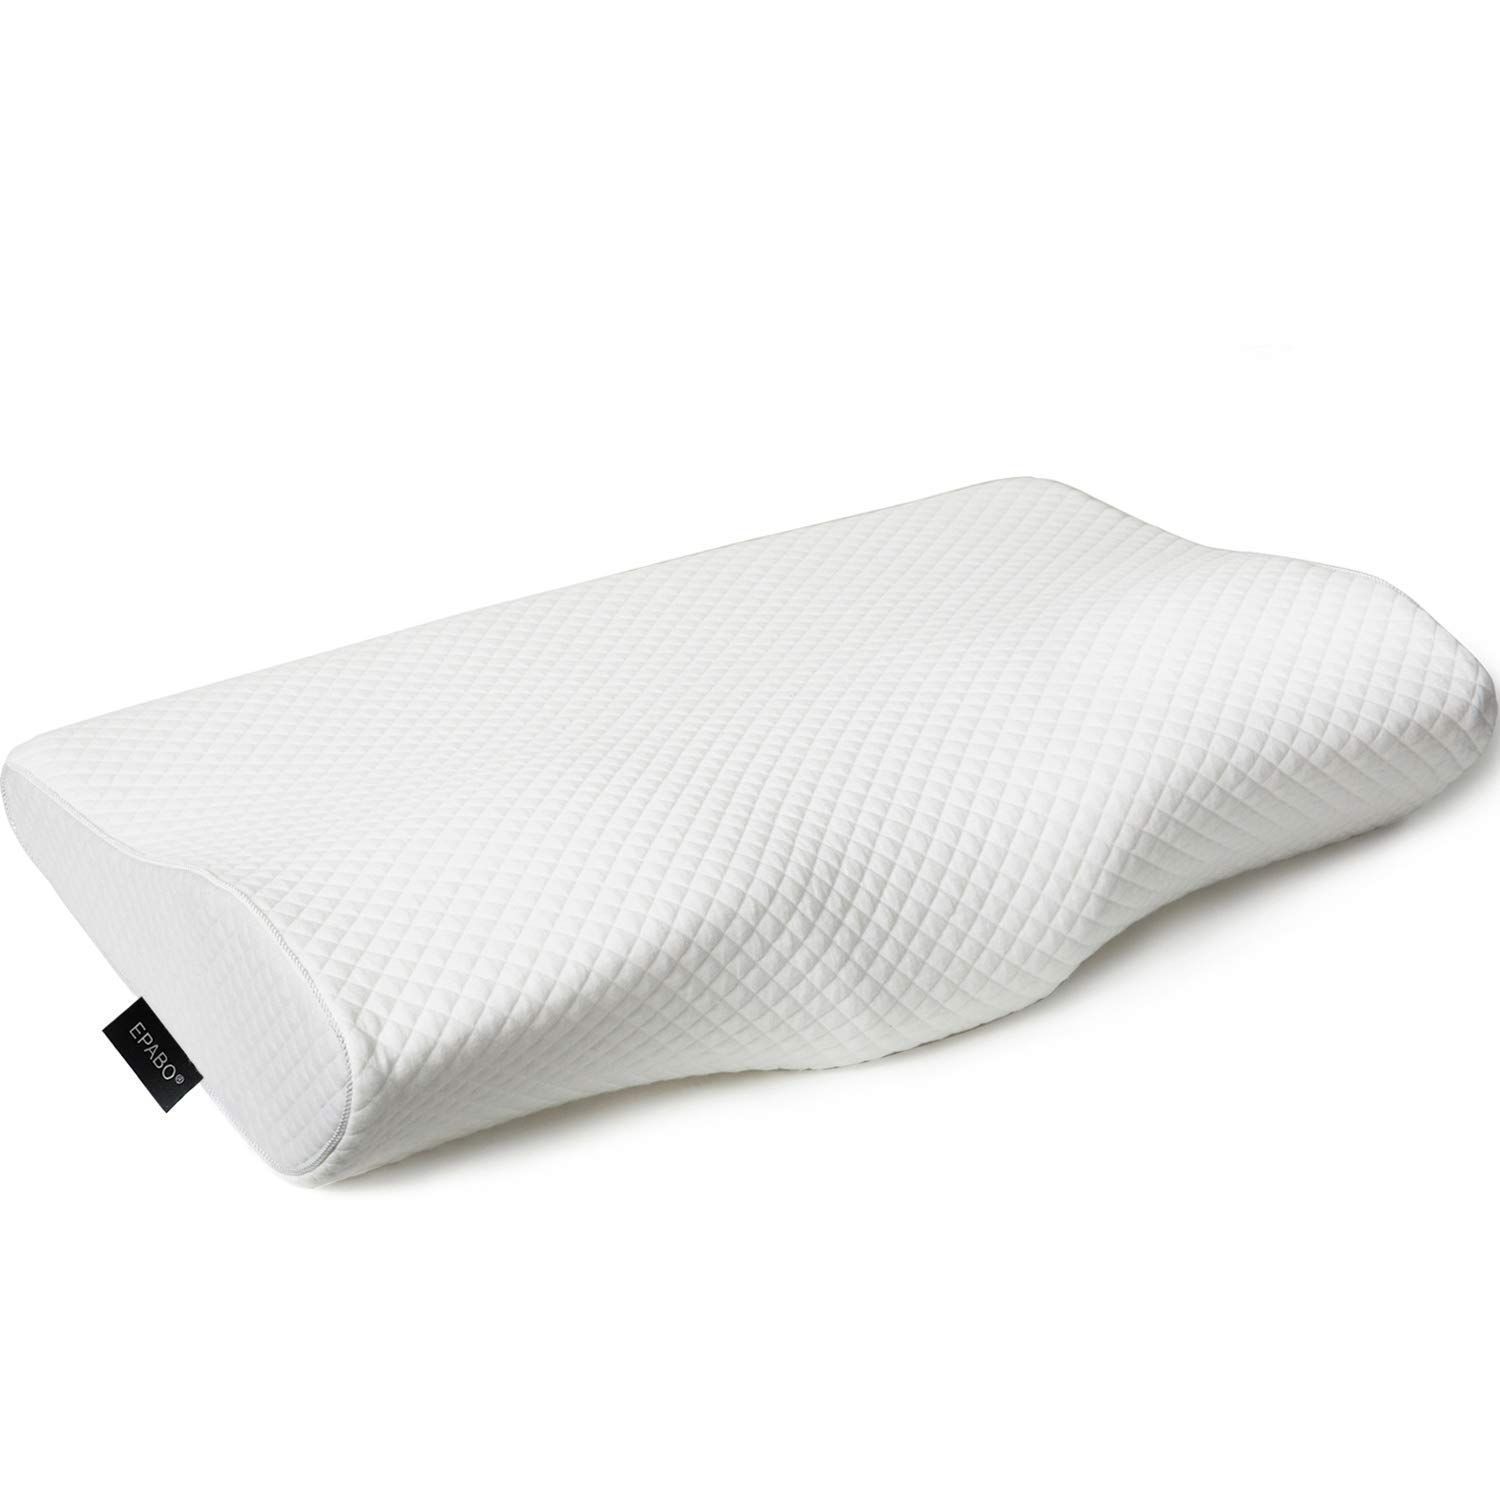 Best Pillow For Side Sleepers 2019 Reviewthis